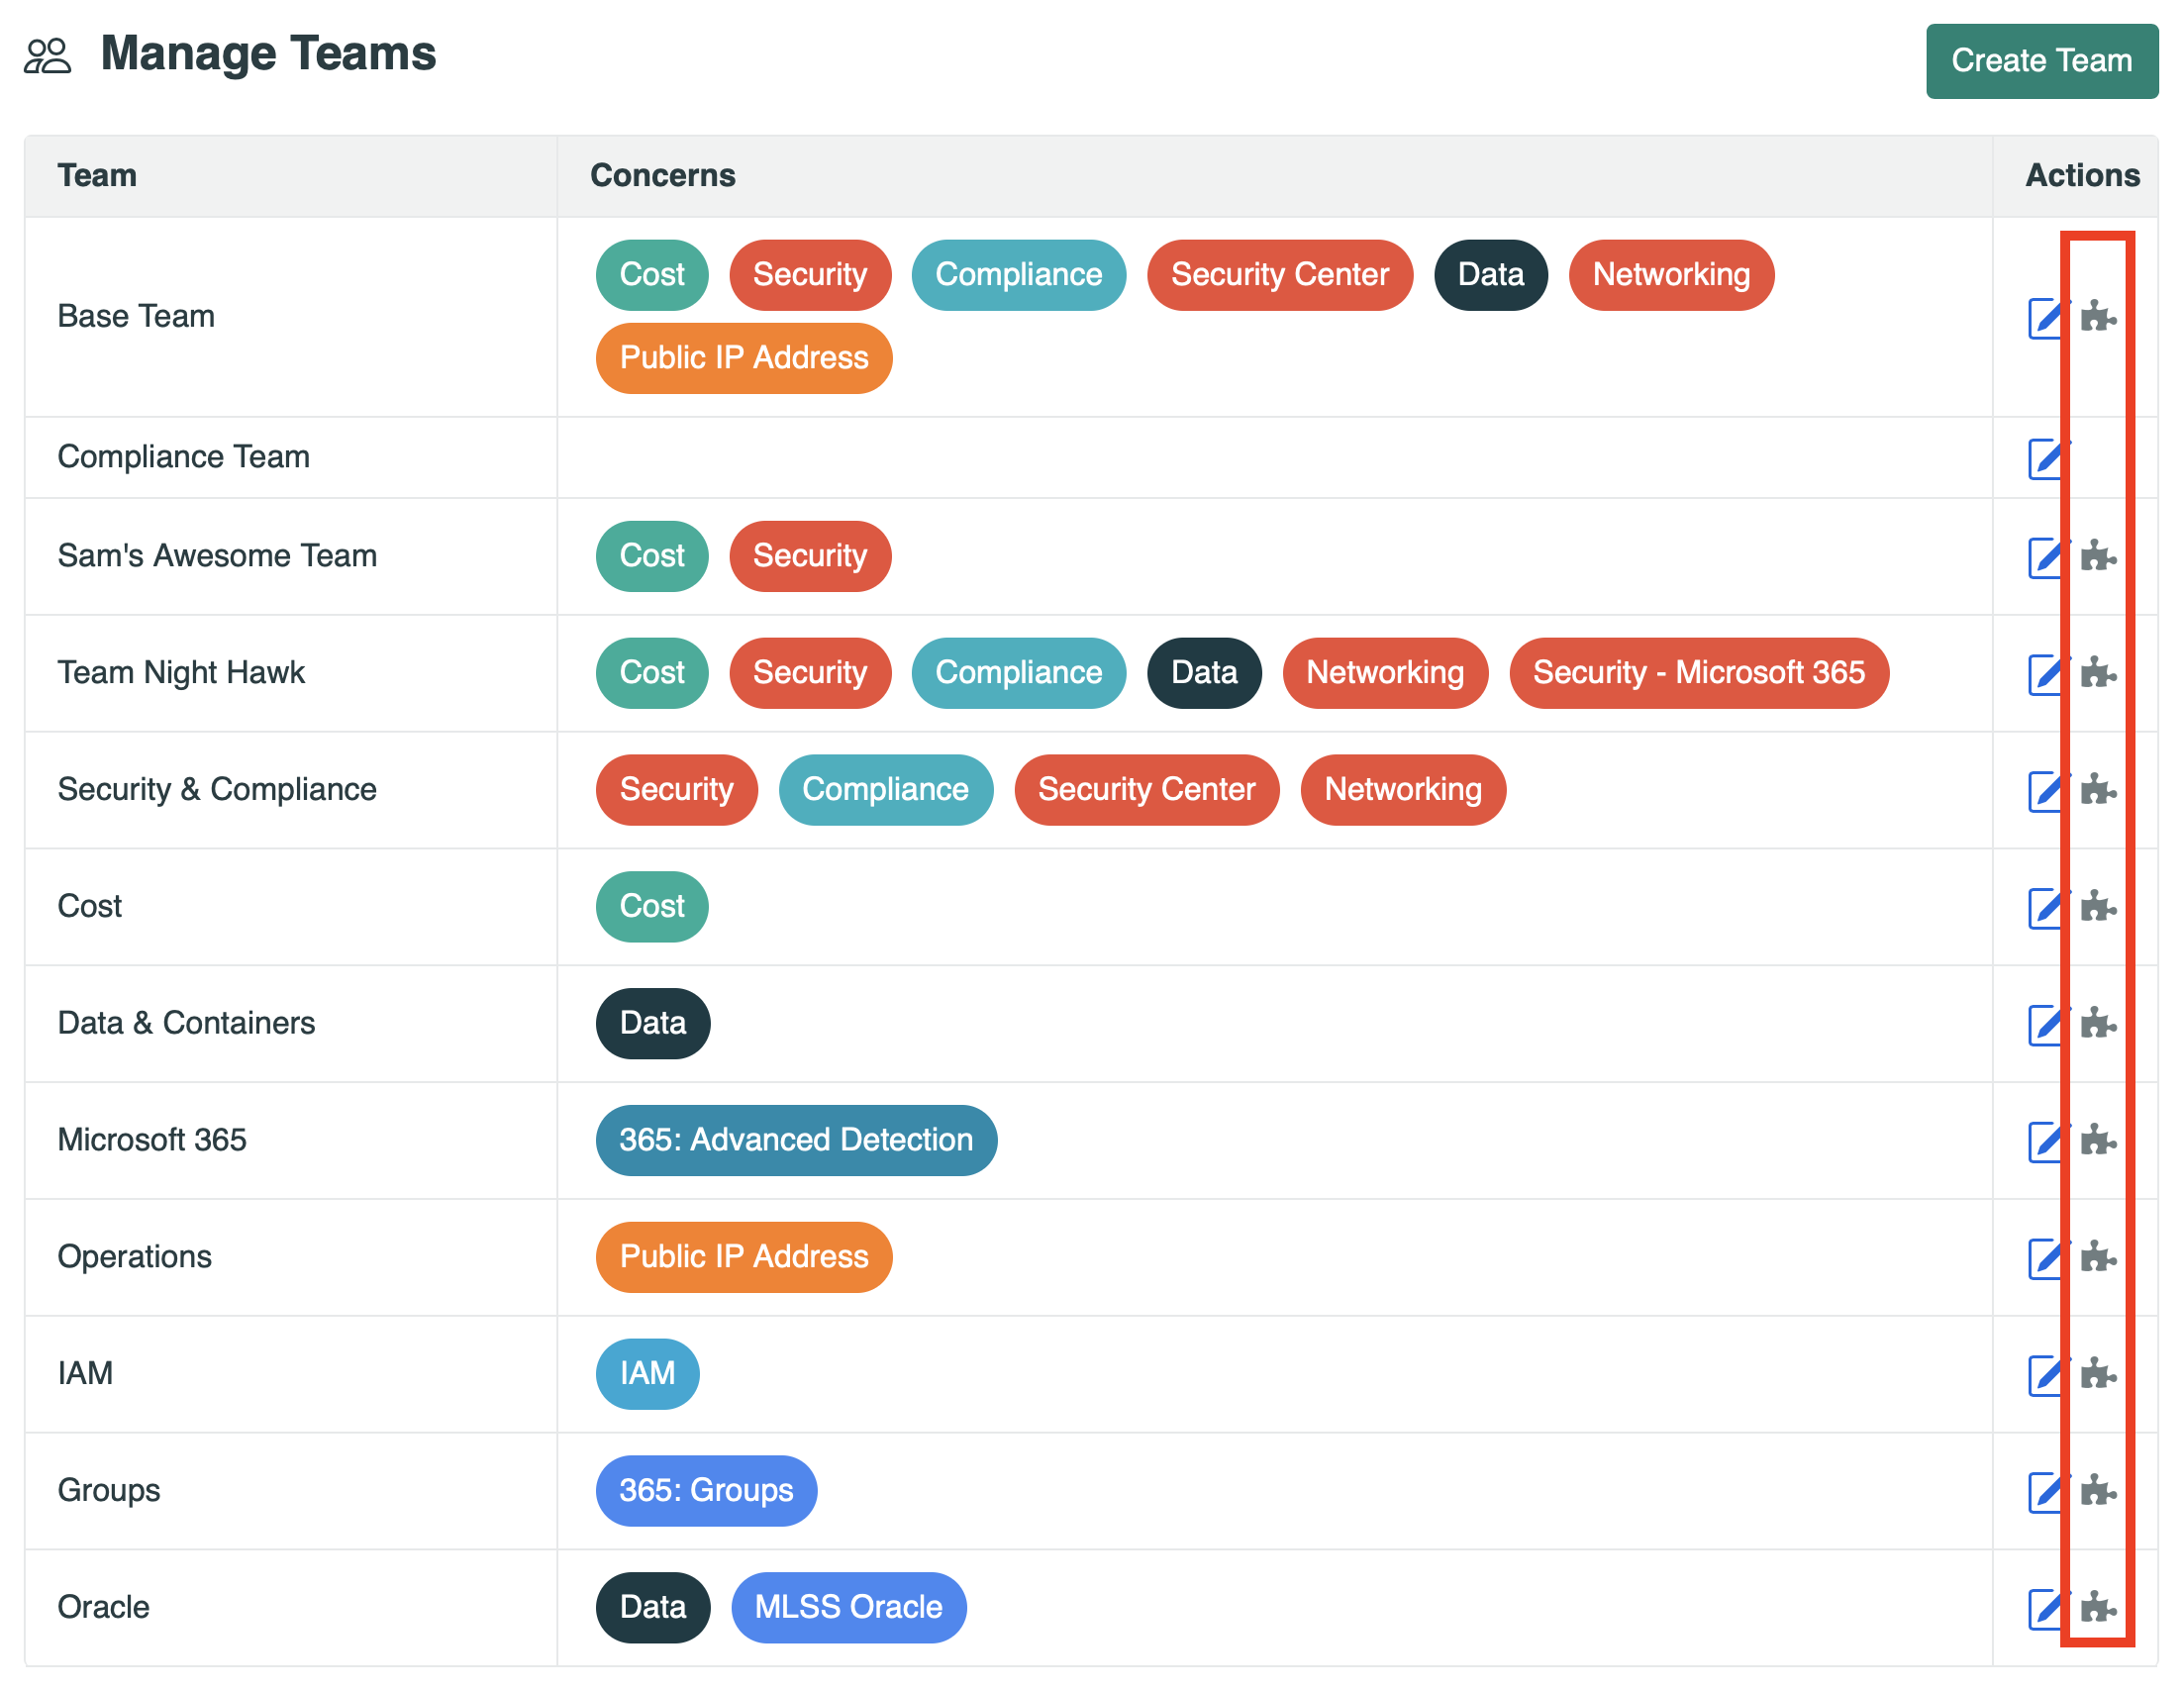 Image of manage teams page